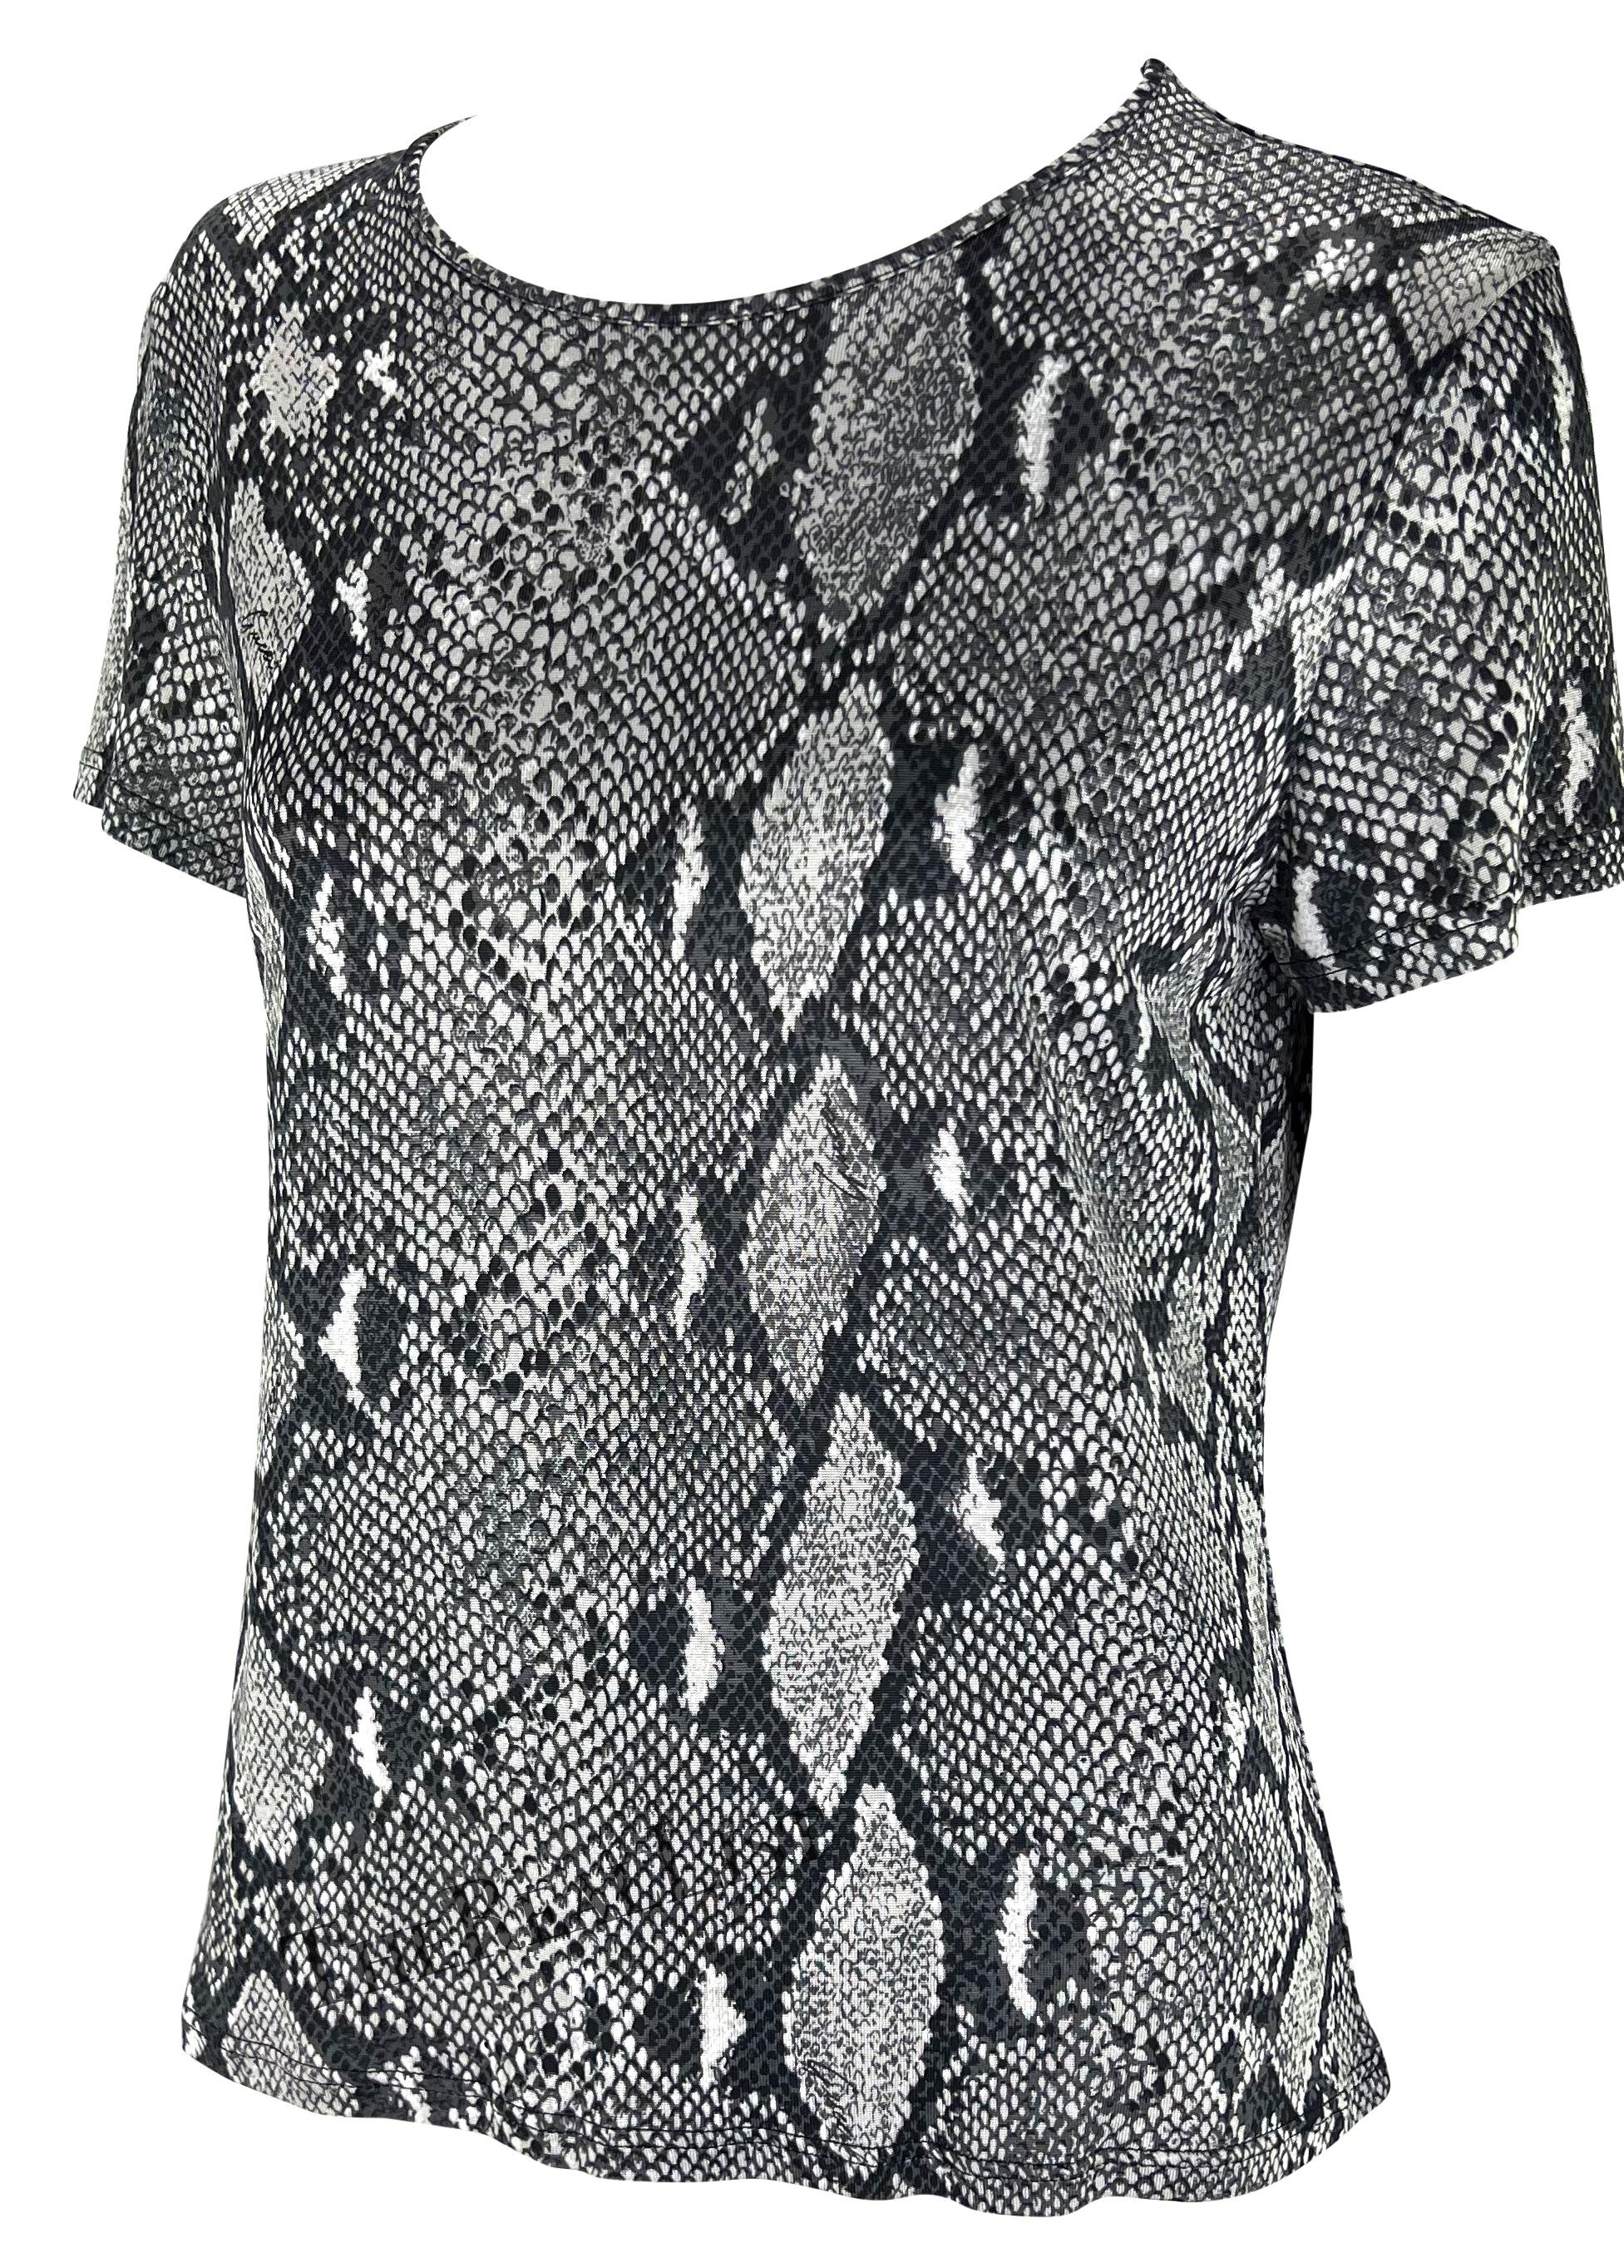 Presenting a grey snakeskin print Gucci t-shirt, designed by Tom Ford. From the Spring/Summer 2000 collection, the season's runway was covered in the identical snakeskin print as this t-shirt. This entirely viscose shirt features a wide crew